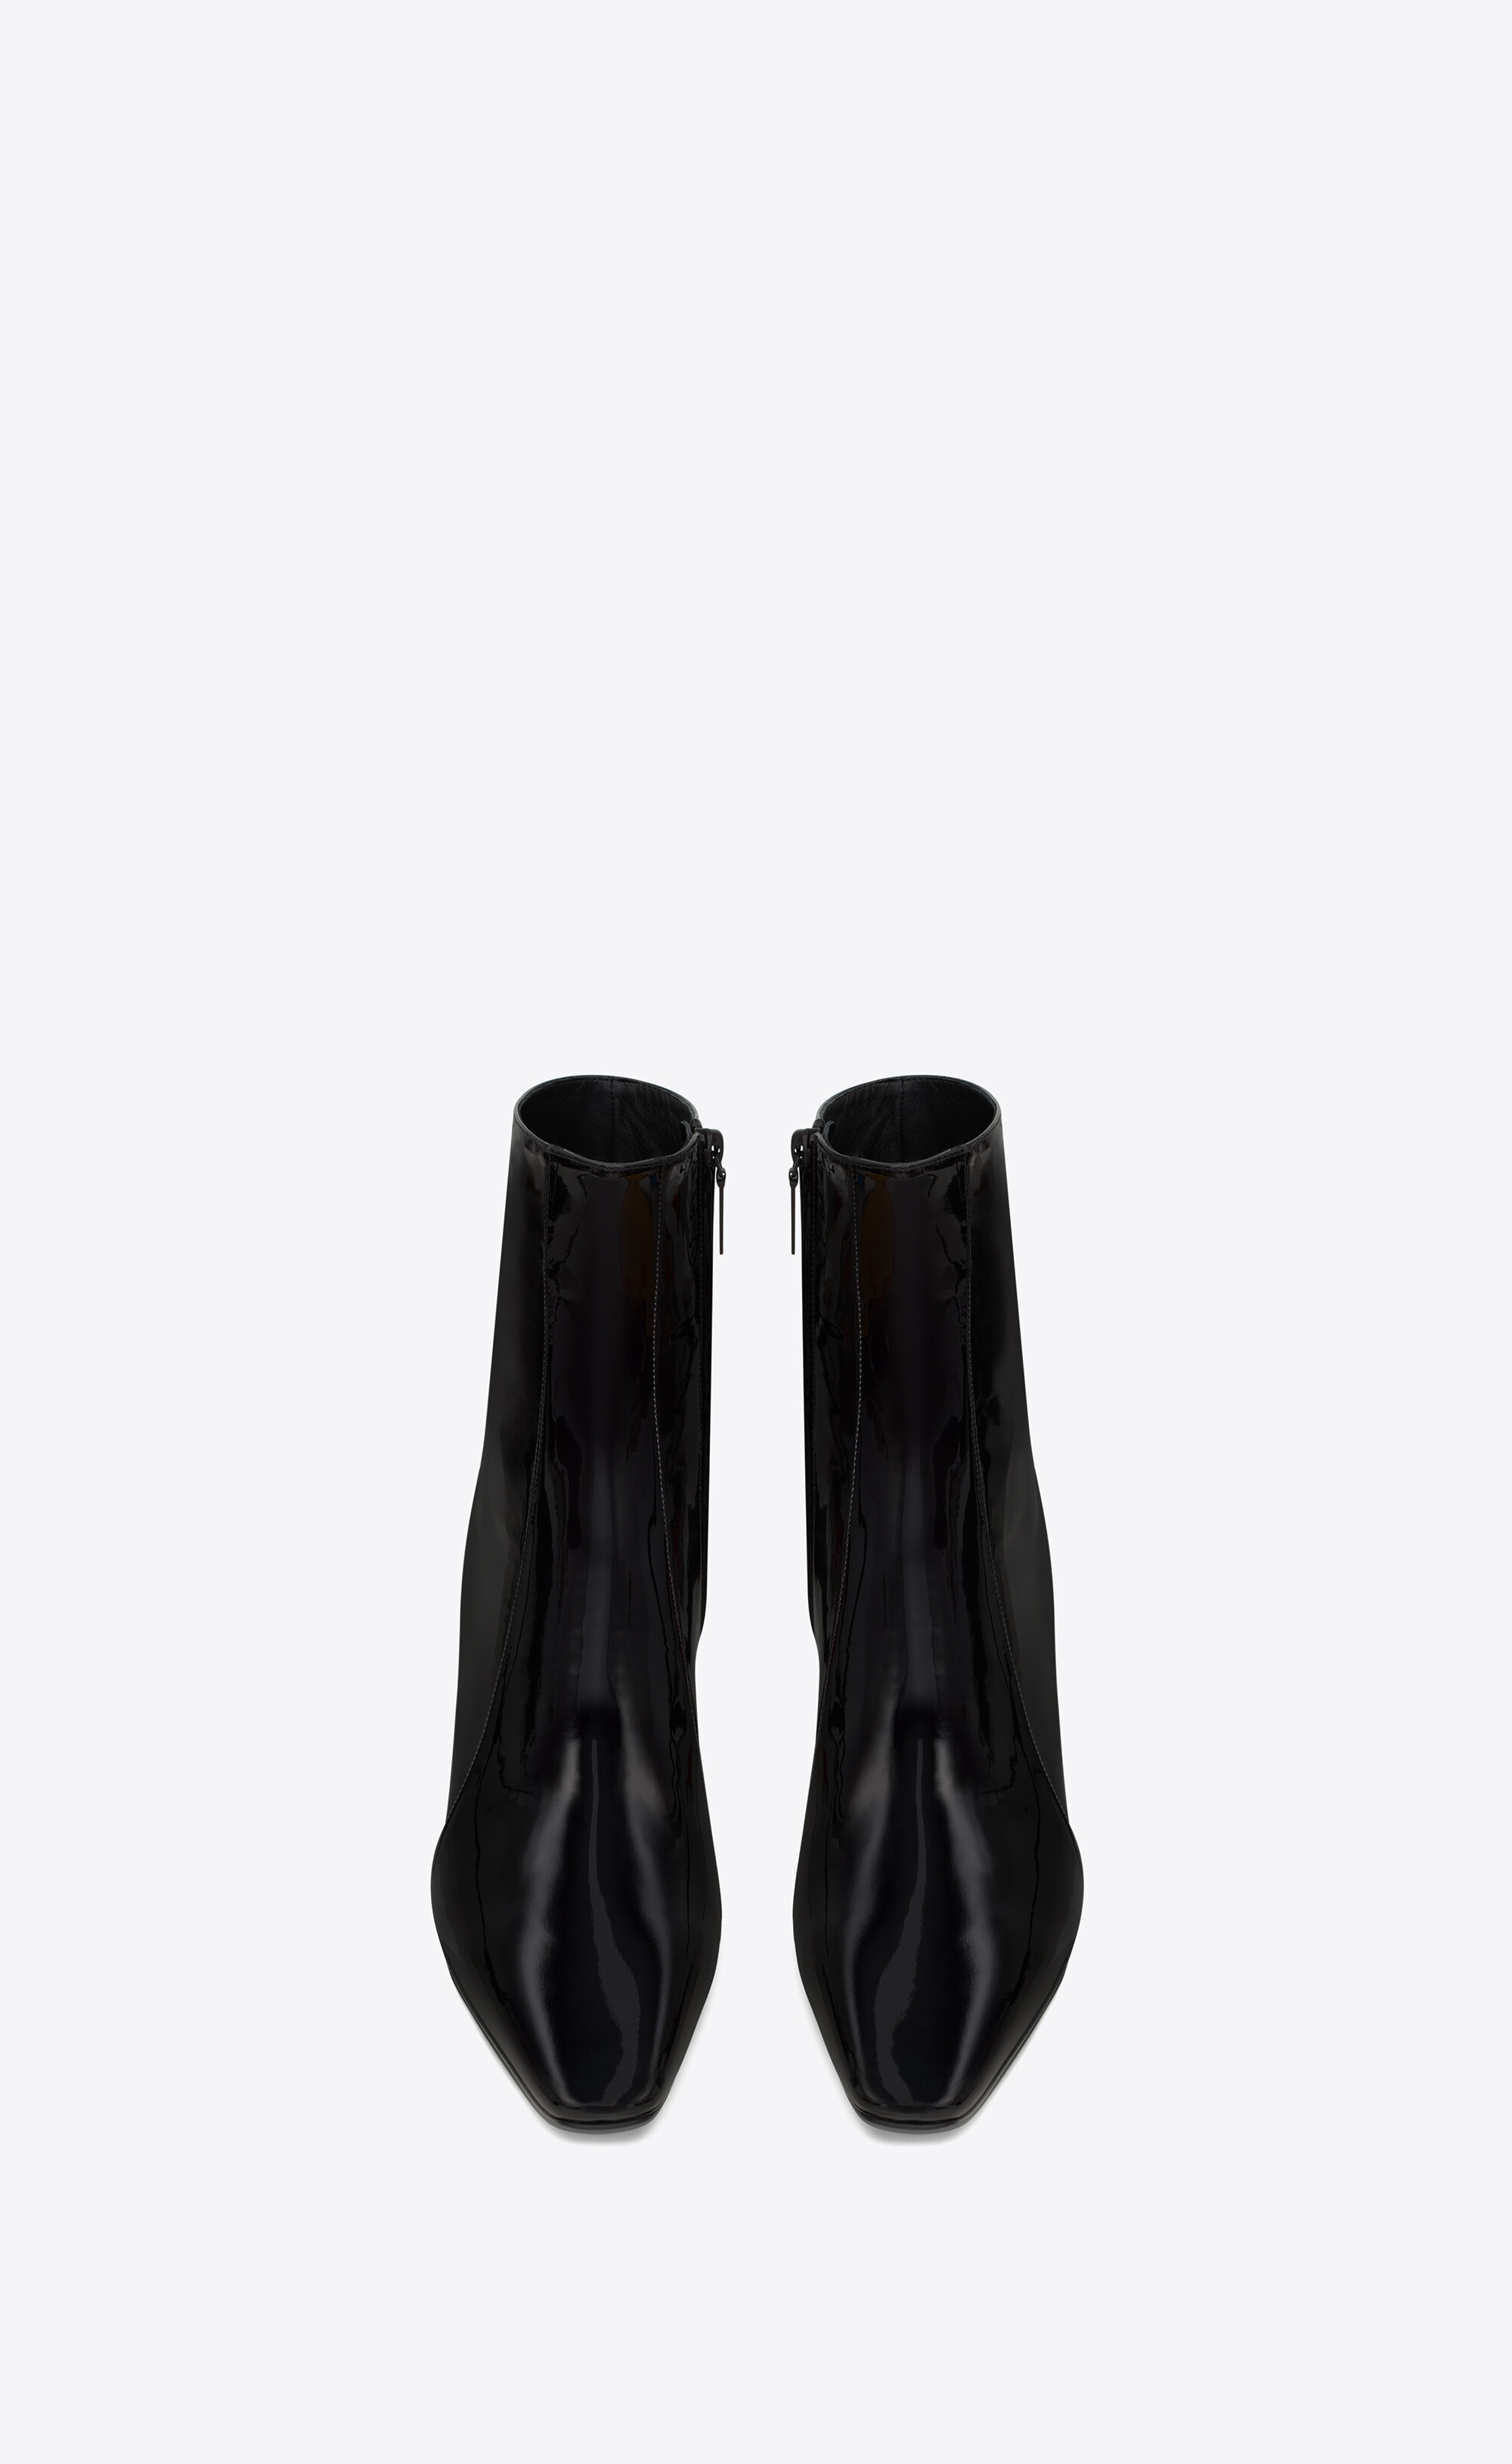 rainer zipped boots in patent leather - 2